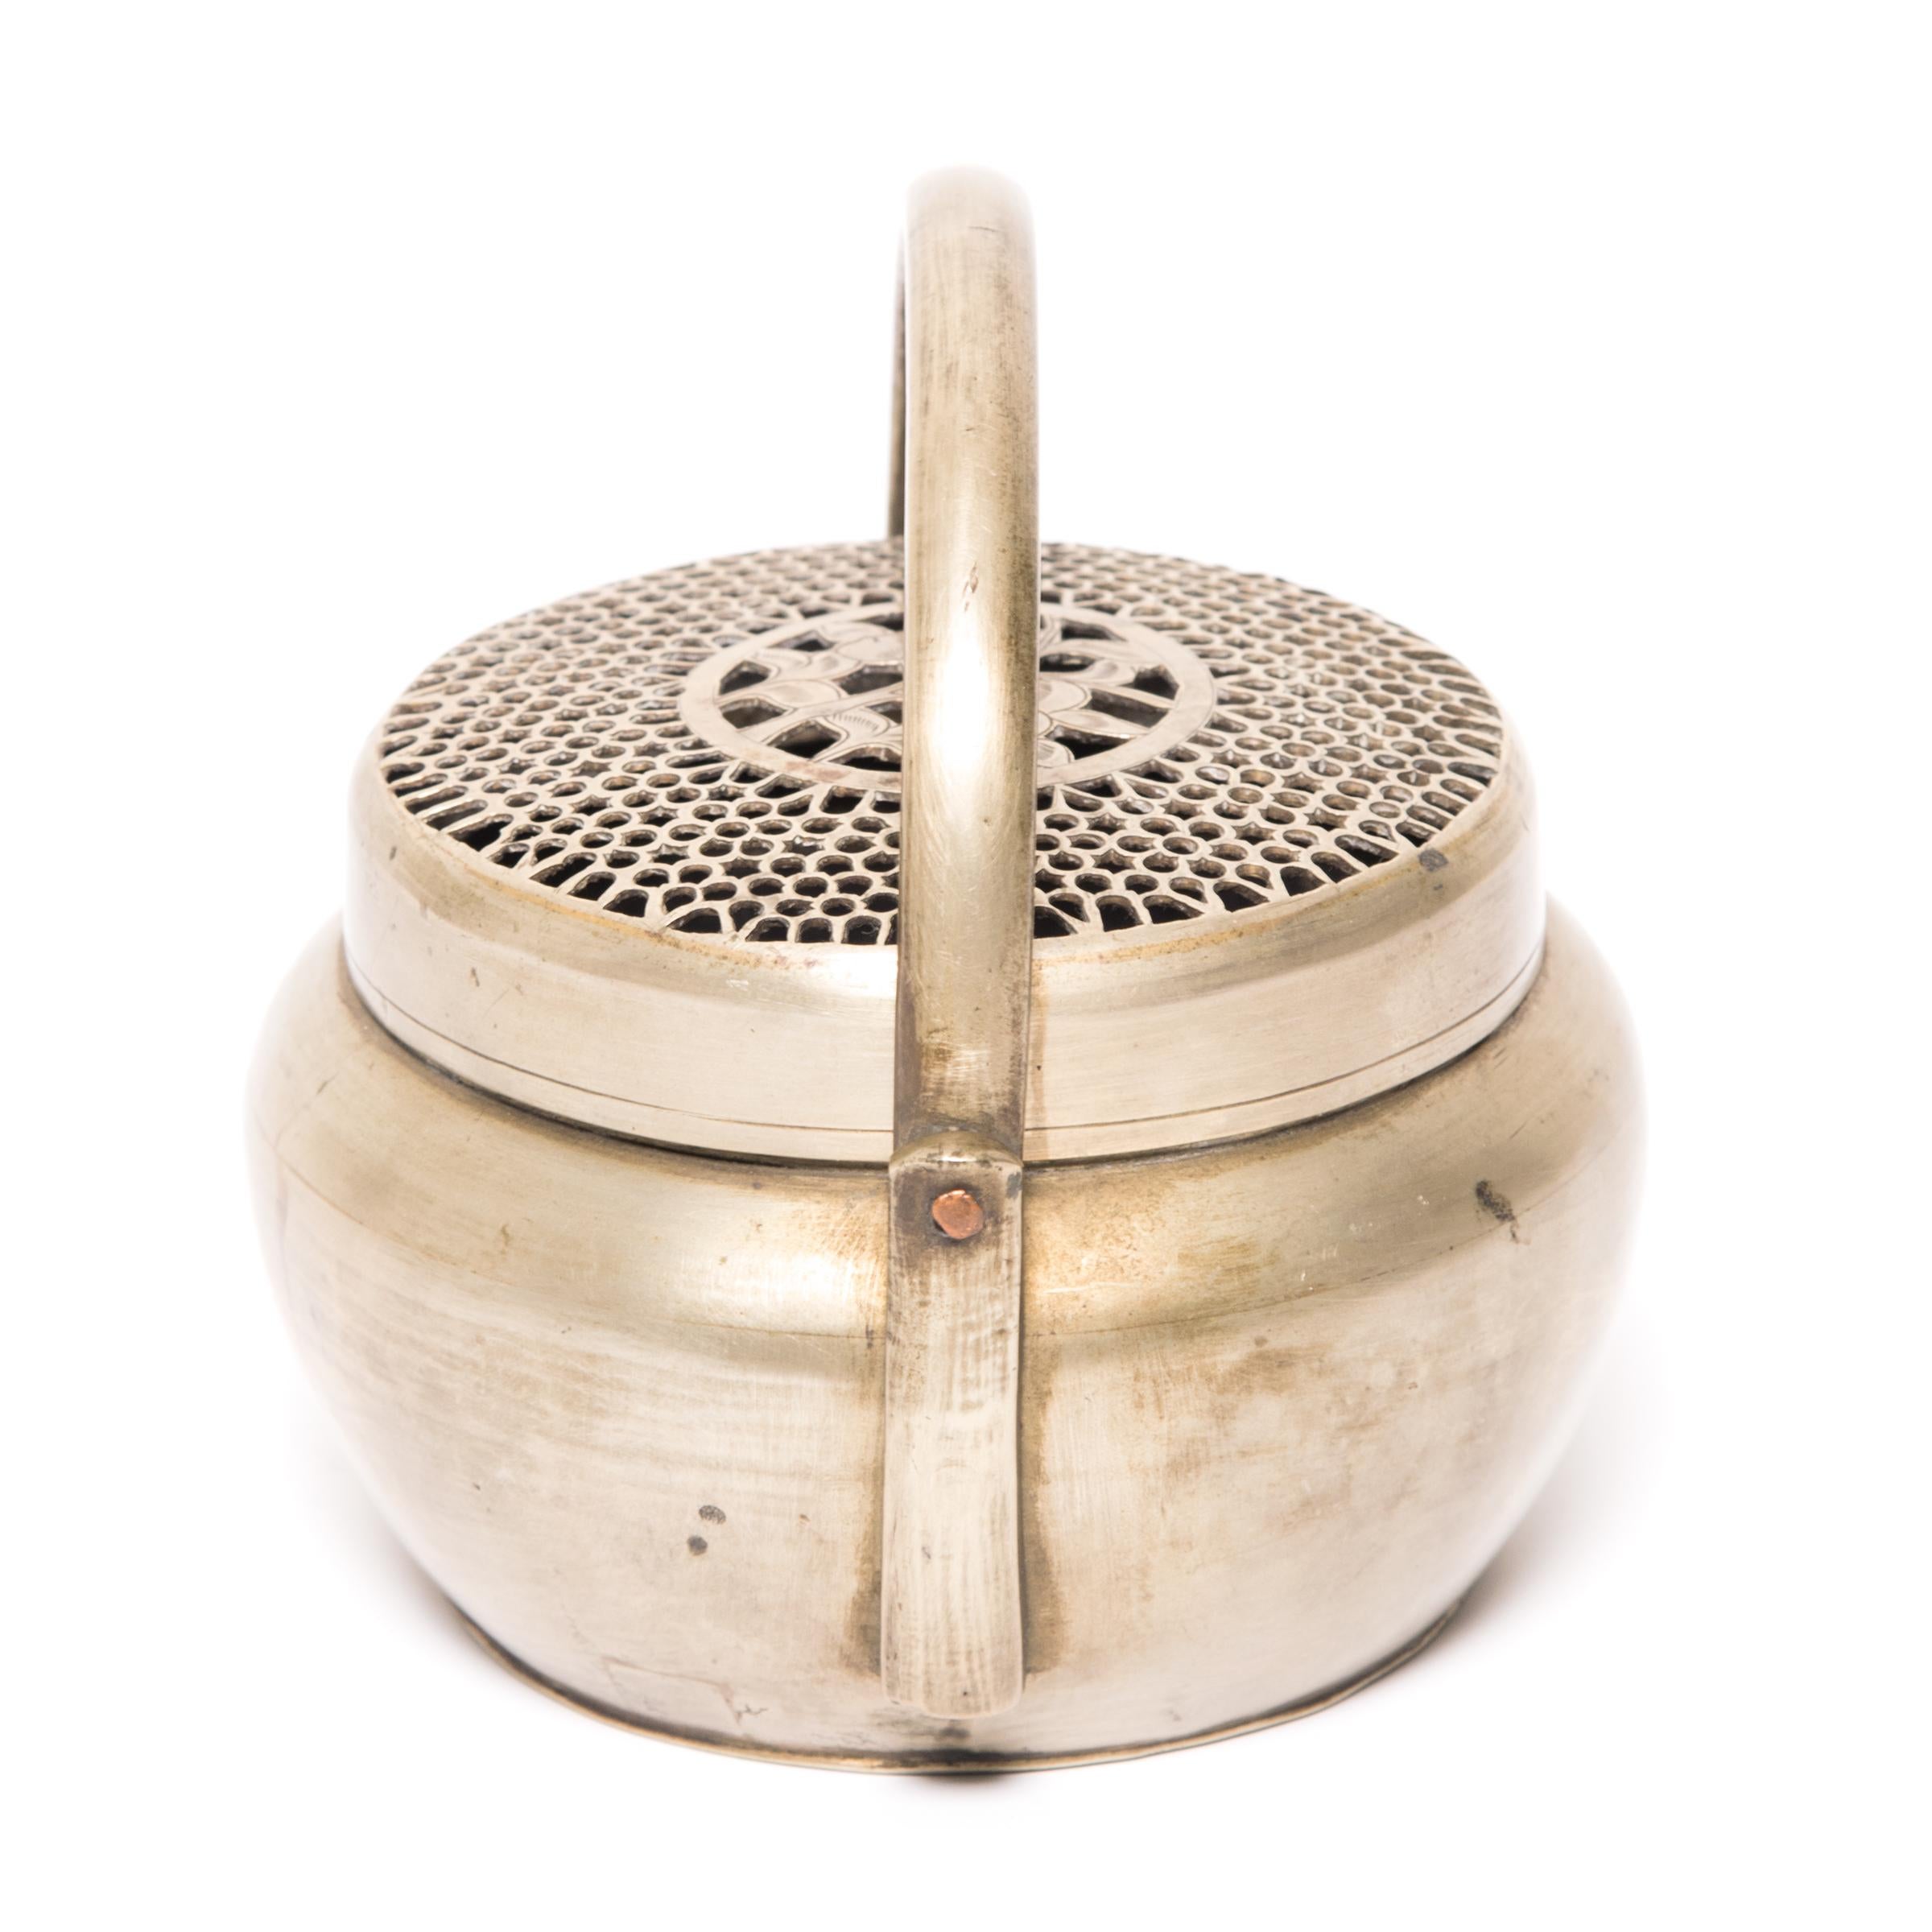 Filled with burning coals, this petite 19th-century brass brazier once warmed the hands of a well-to-do person on a cold winter's night in northern China. The round brazier is crafted of white brass with a hinged handle and a lid pierced with an